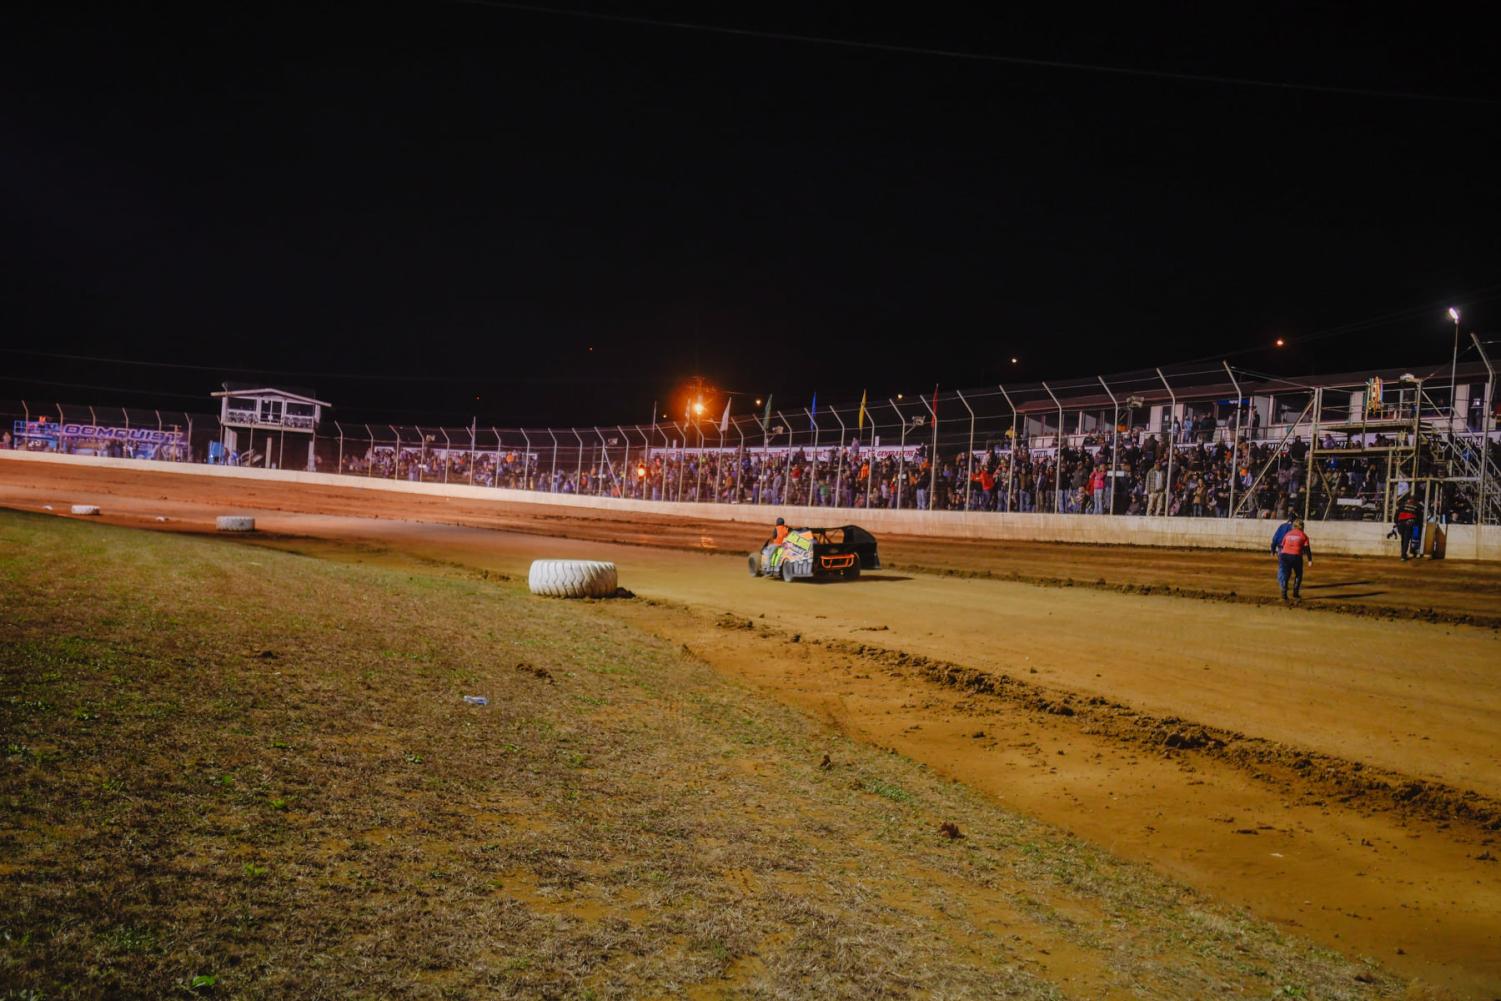 Photo of the Portsmouth Raceway Park from the latest event.